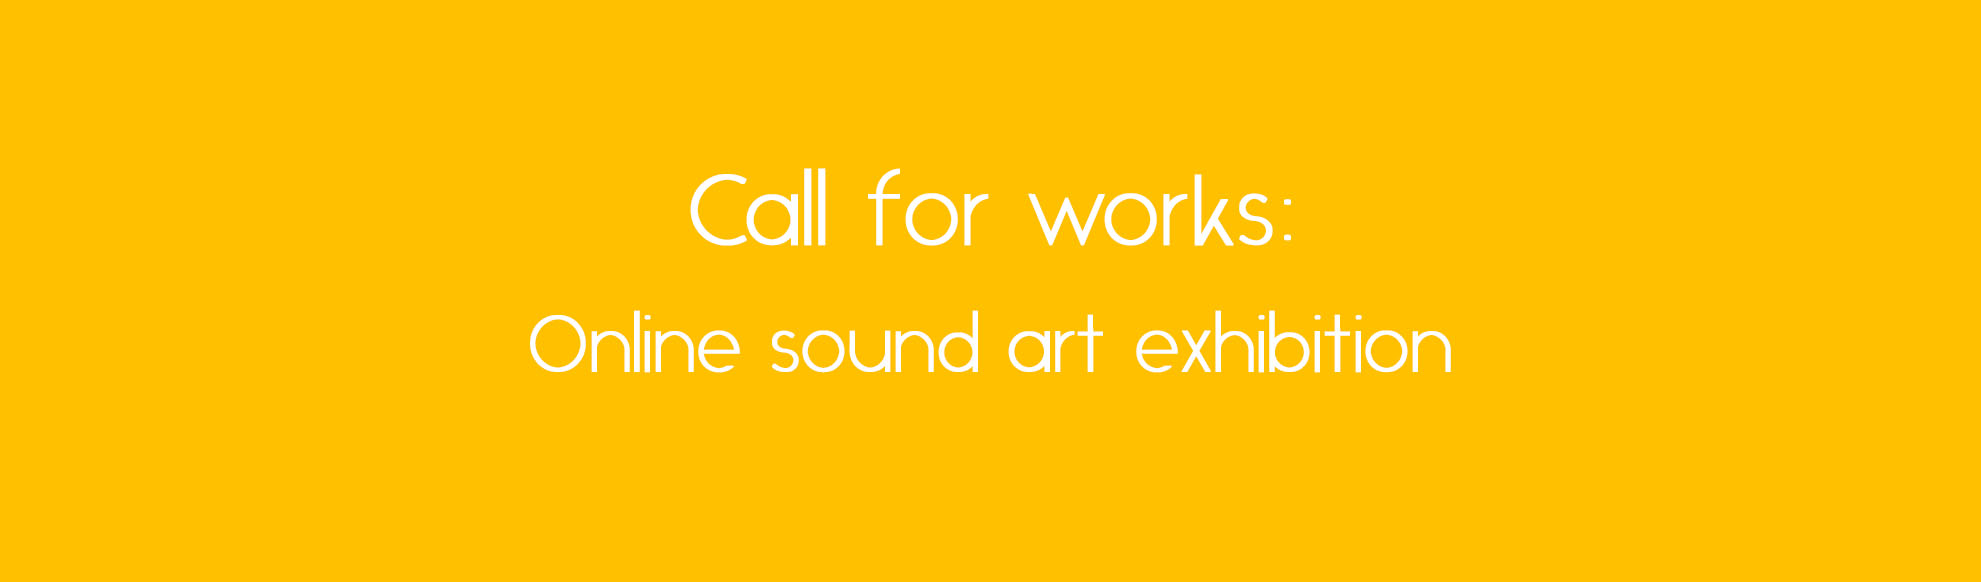 A yellow background with white text that reads "Call for works: online sound art exhibition"